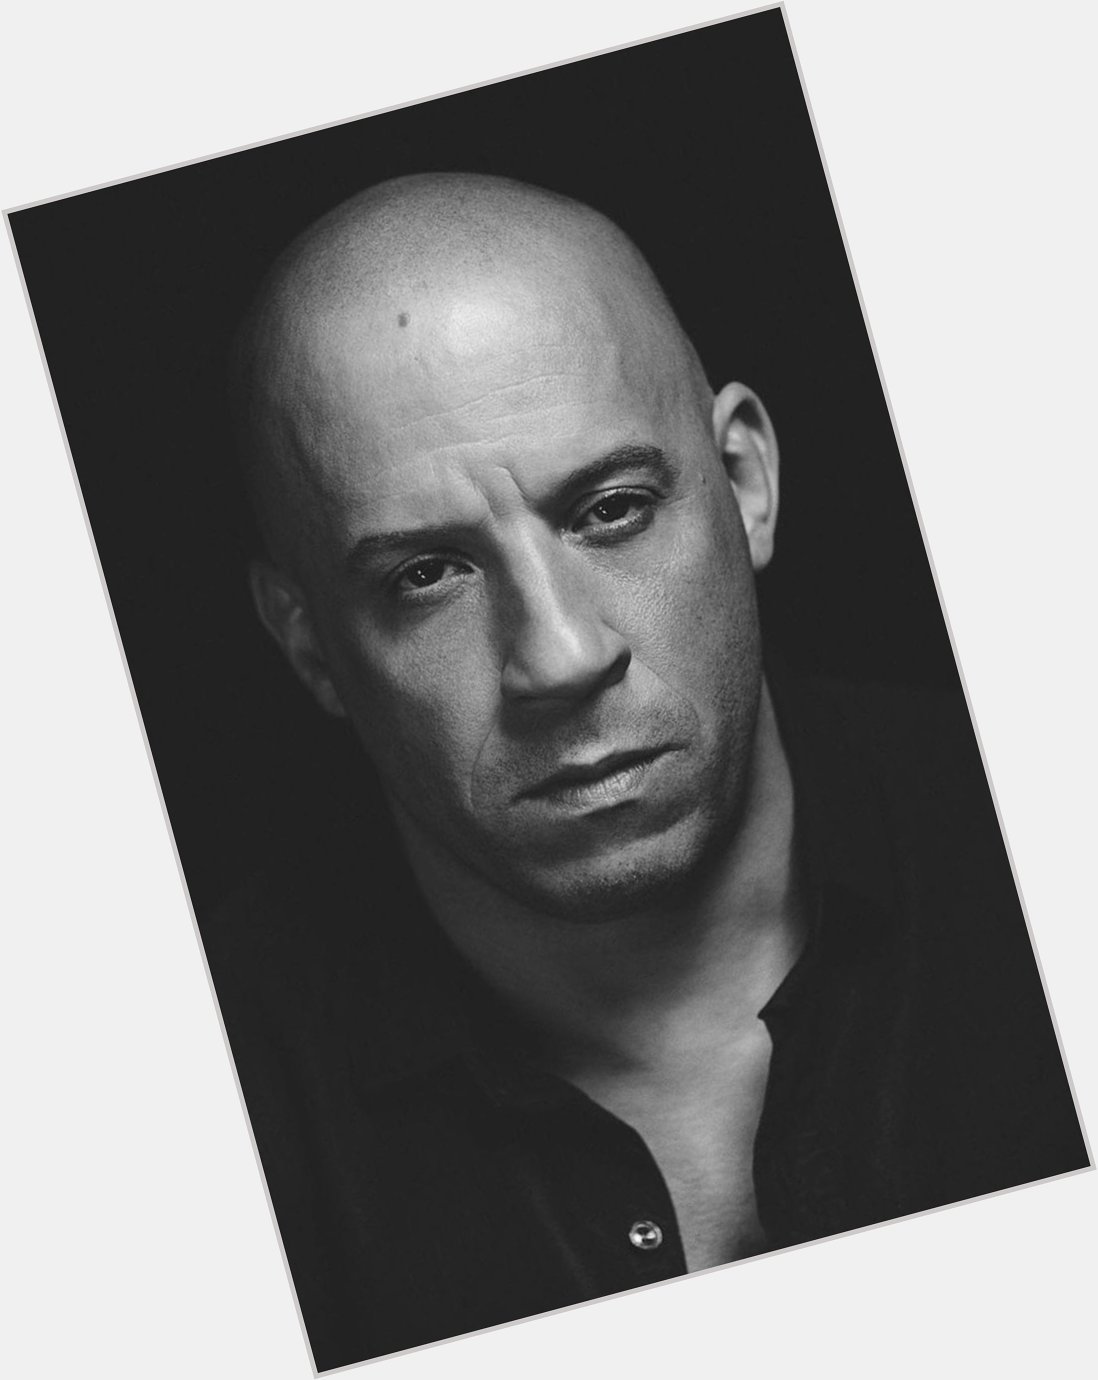 Happy Birthday to Vin Diesel who turns 52 today! 